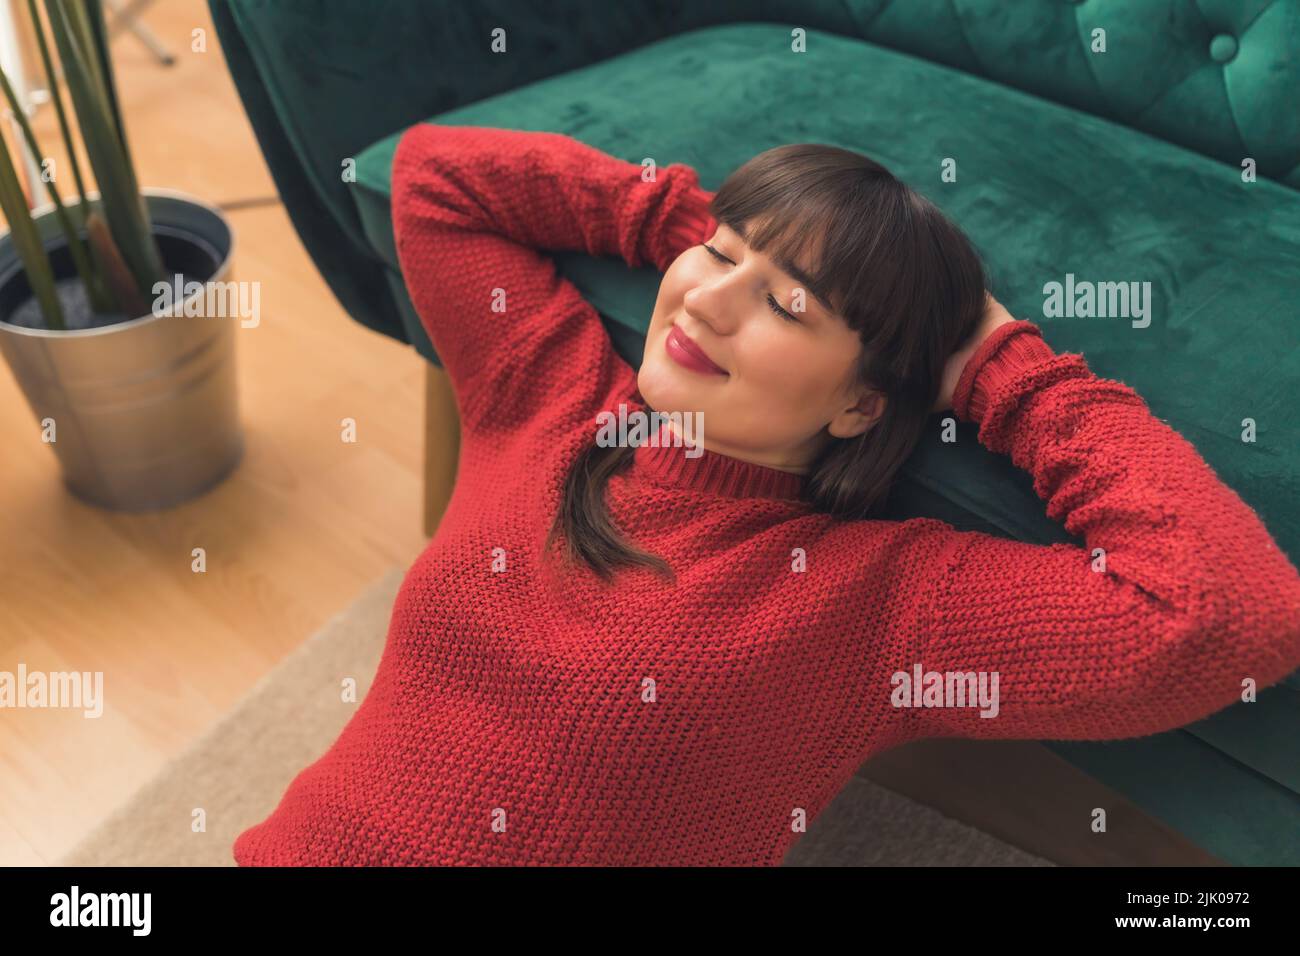 Calm happy young brunette woman wearing a red sweater and relaxing on a couch with her eyes closed. High-quality photo Stock Photo